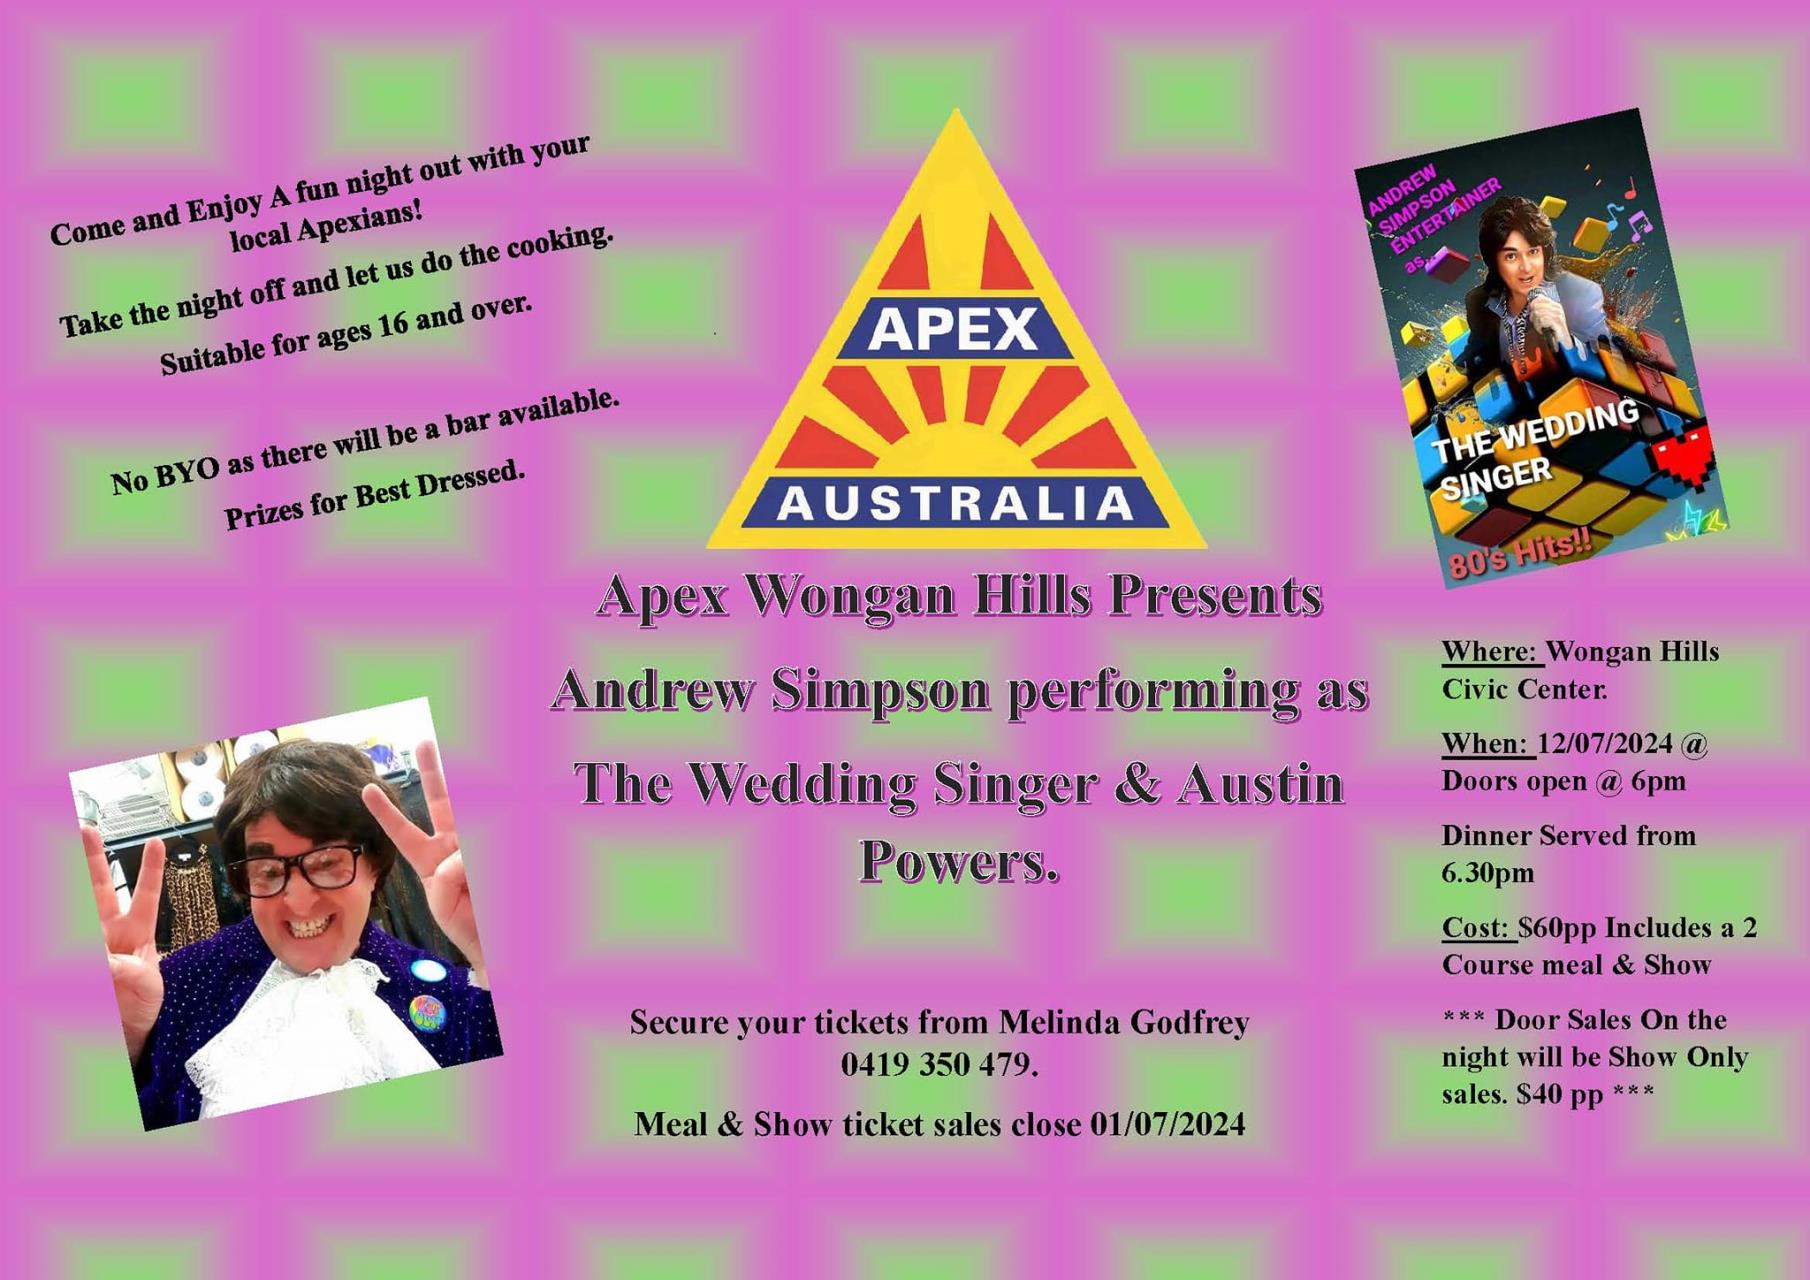 Apex Cabaret Show - Andrew Simpson performing as The Wedding Singer and